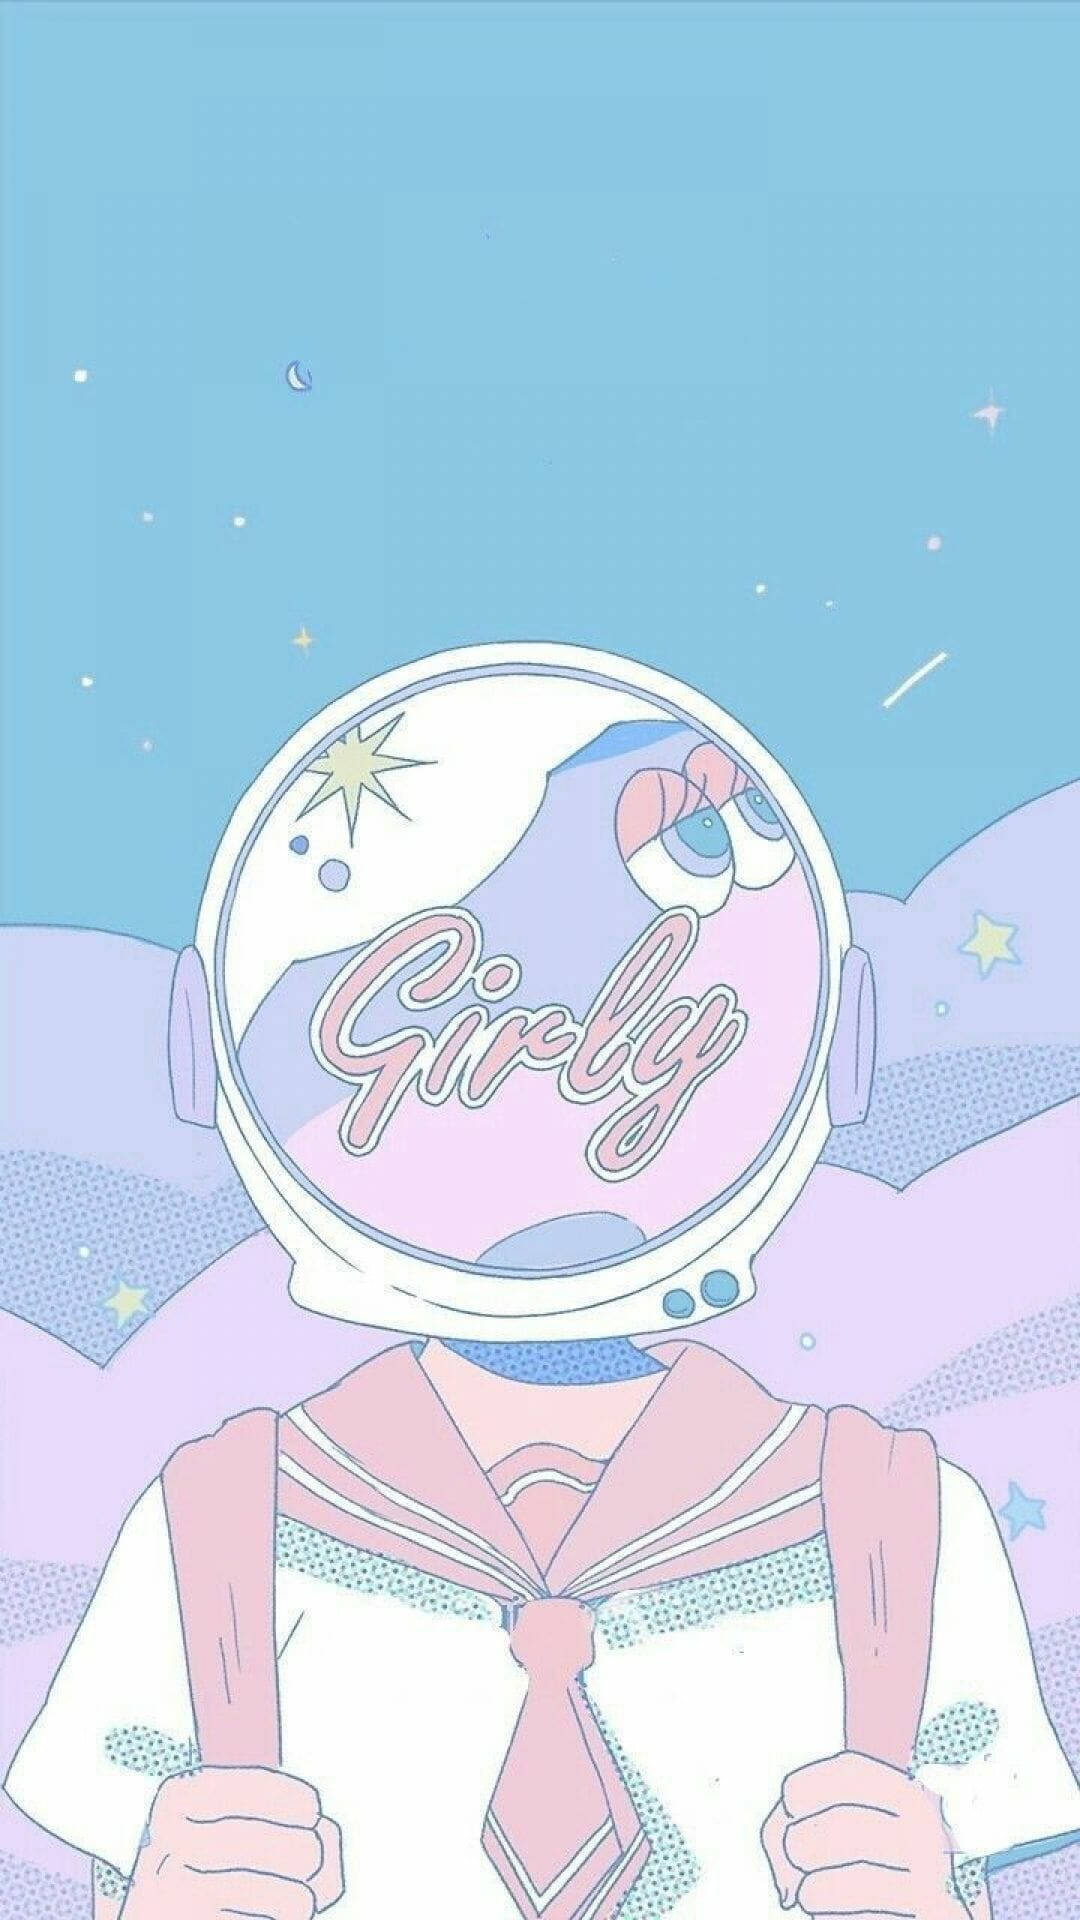 Space-themed Pretty Aesthetic Background